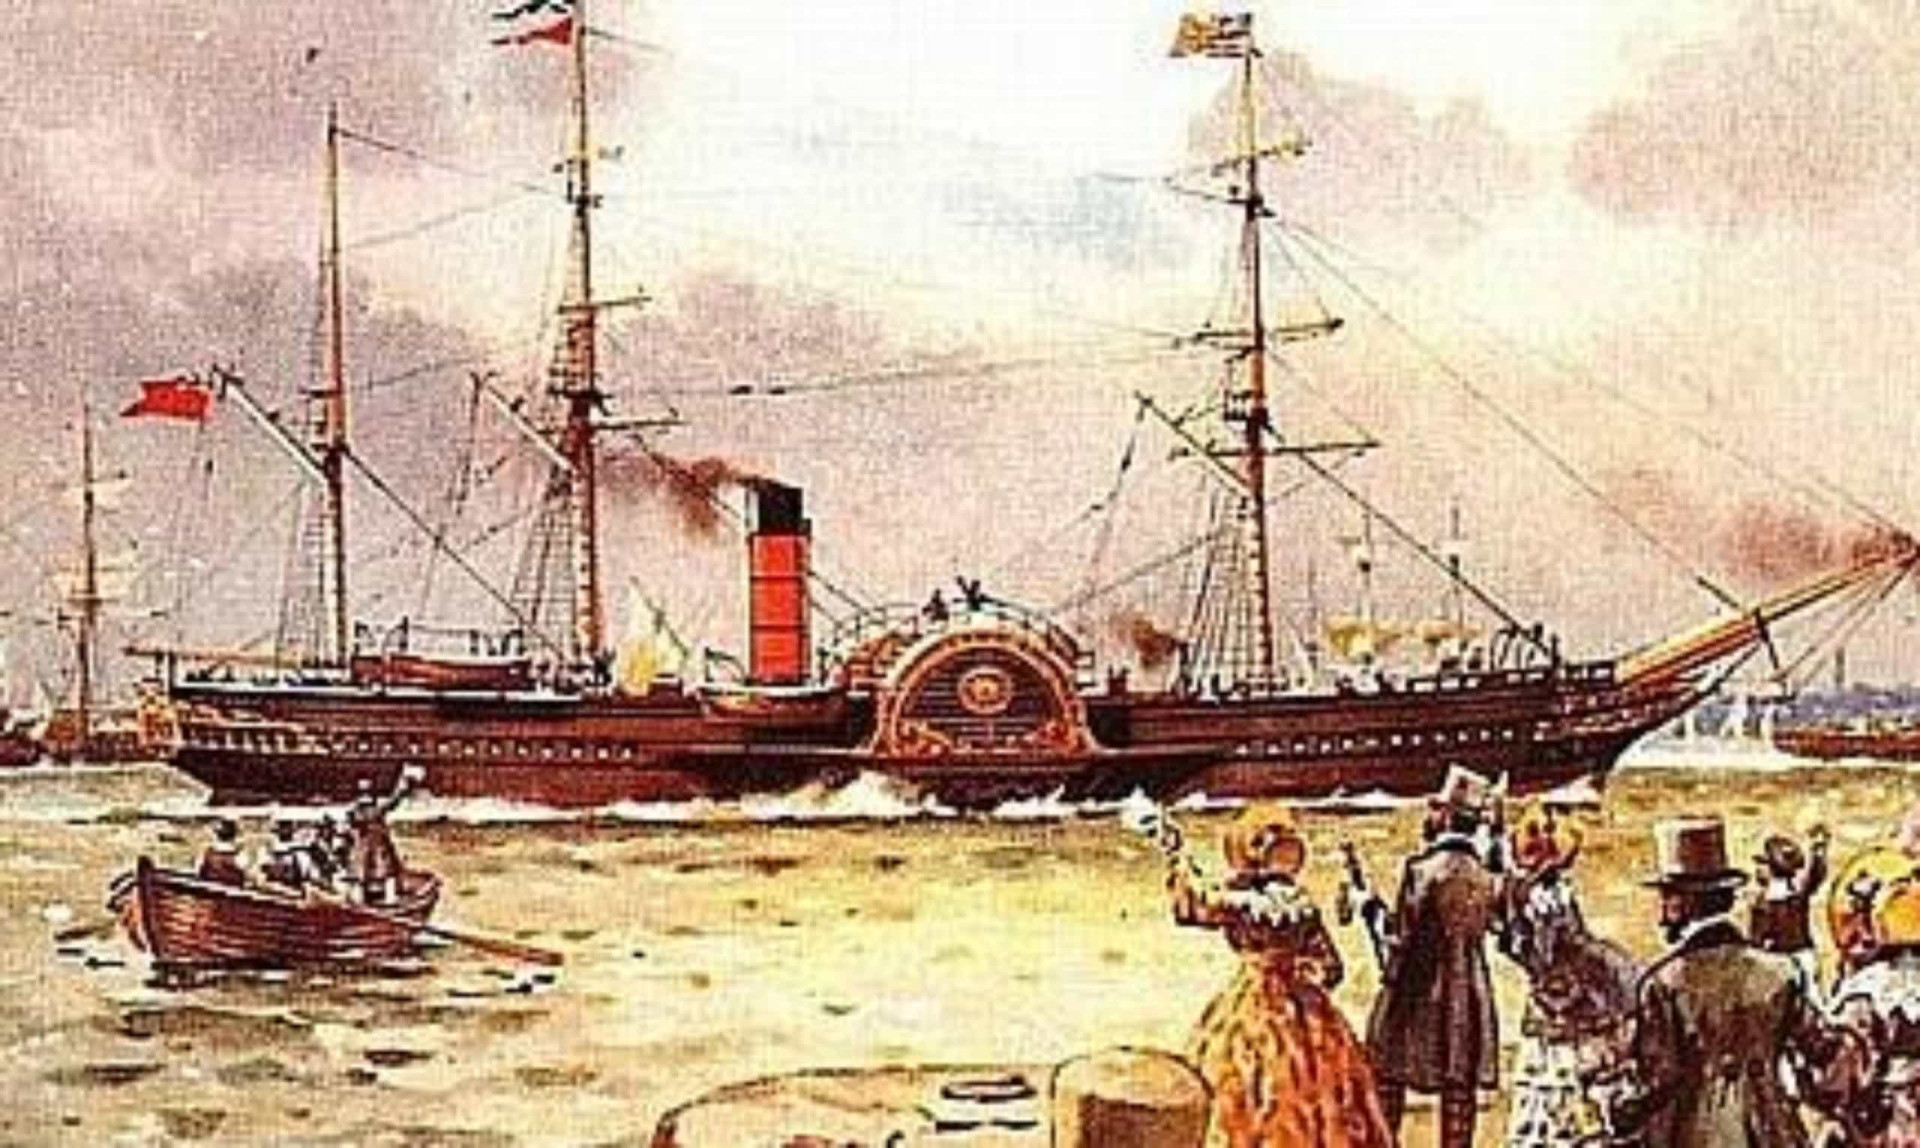 <p>The <em>Britannia</em> class was the Cunard Line's initial fleet of wooden paddlers that established the first year-round scheduled Atlantic steamship service in 1840. Pictured is RMS <em>Britannia</em>.</p>